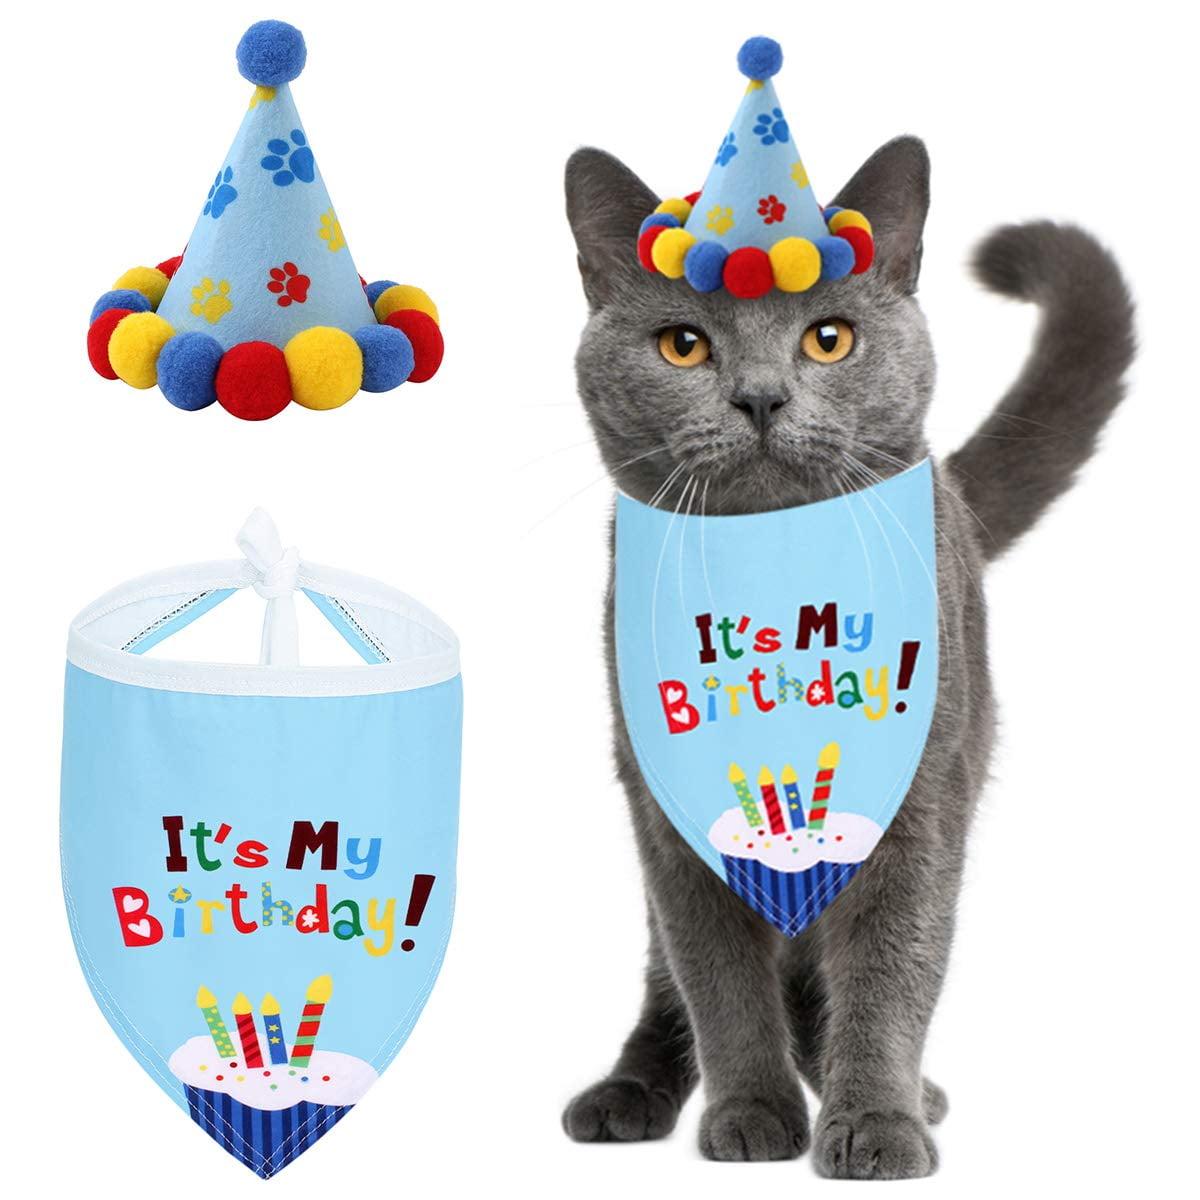 Party Bday or Adoption Gift Celebration Pet London Dog or Cat Birthday Bandana Reversible in Fun Happy Bright Colours Celebrate Dogs Happy Birthday for Boy or Girl-Rainbow Pattern